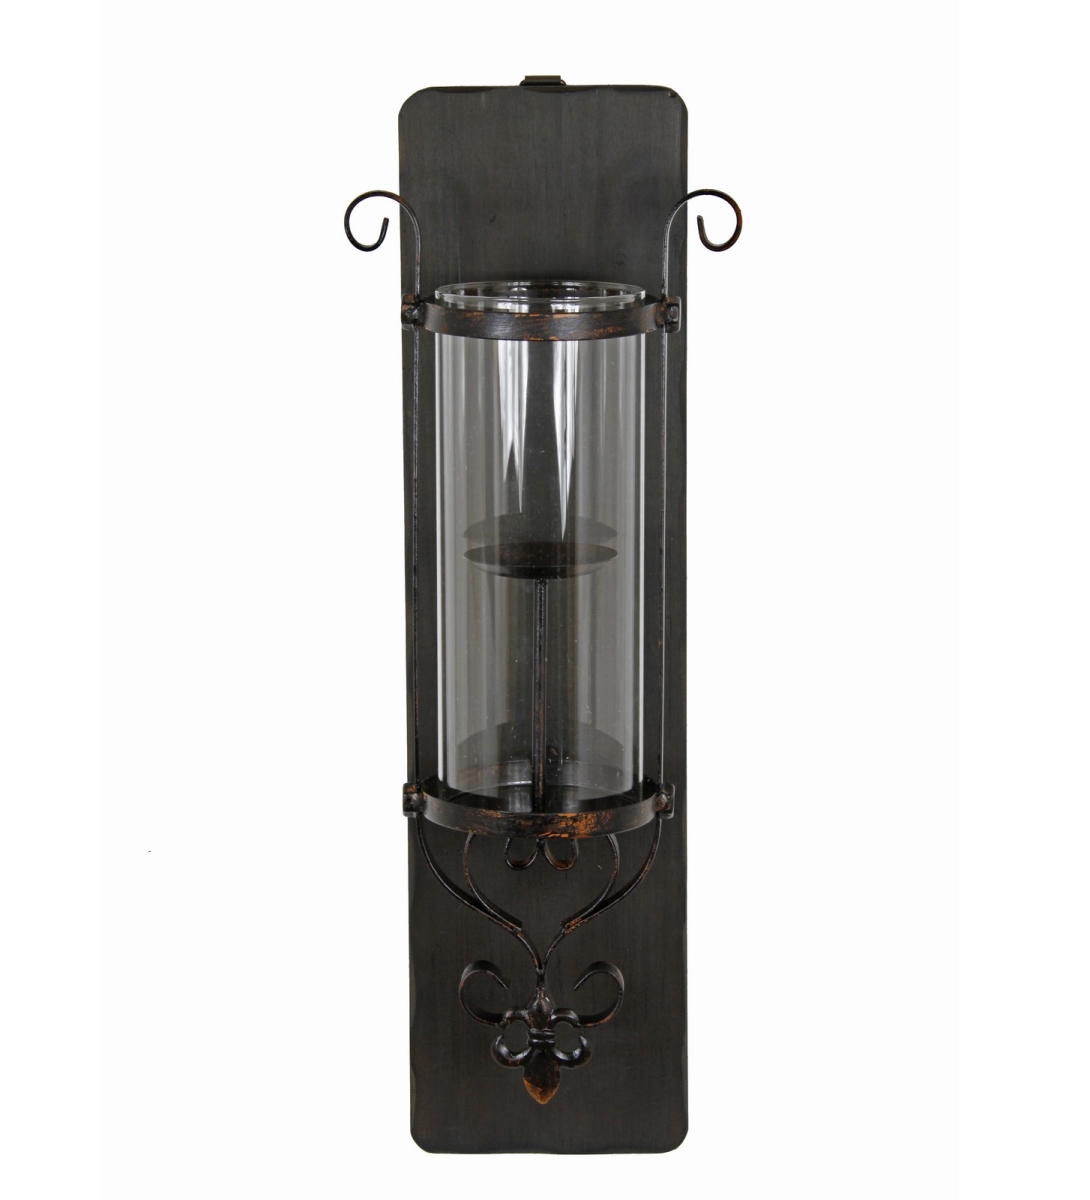 18299 9 X 7 X 25.5 In. Iron Hurricane Wall Sconce, Small